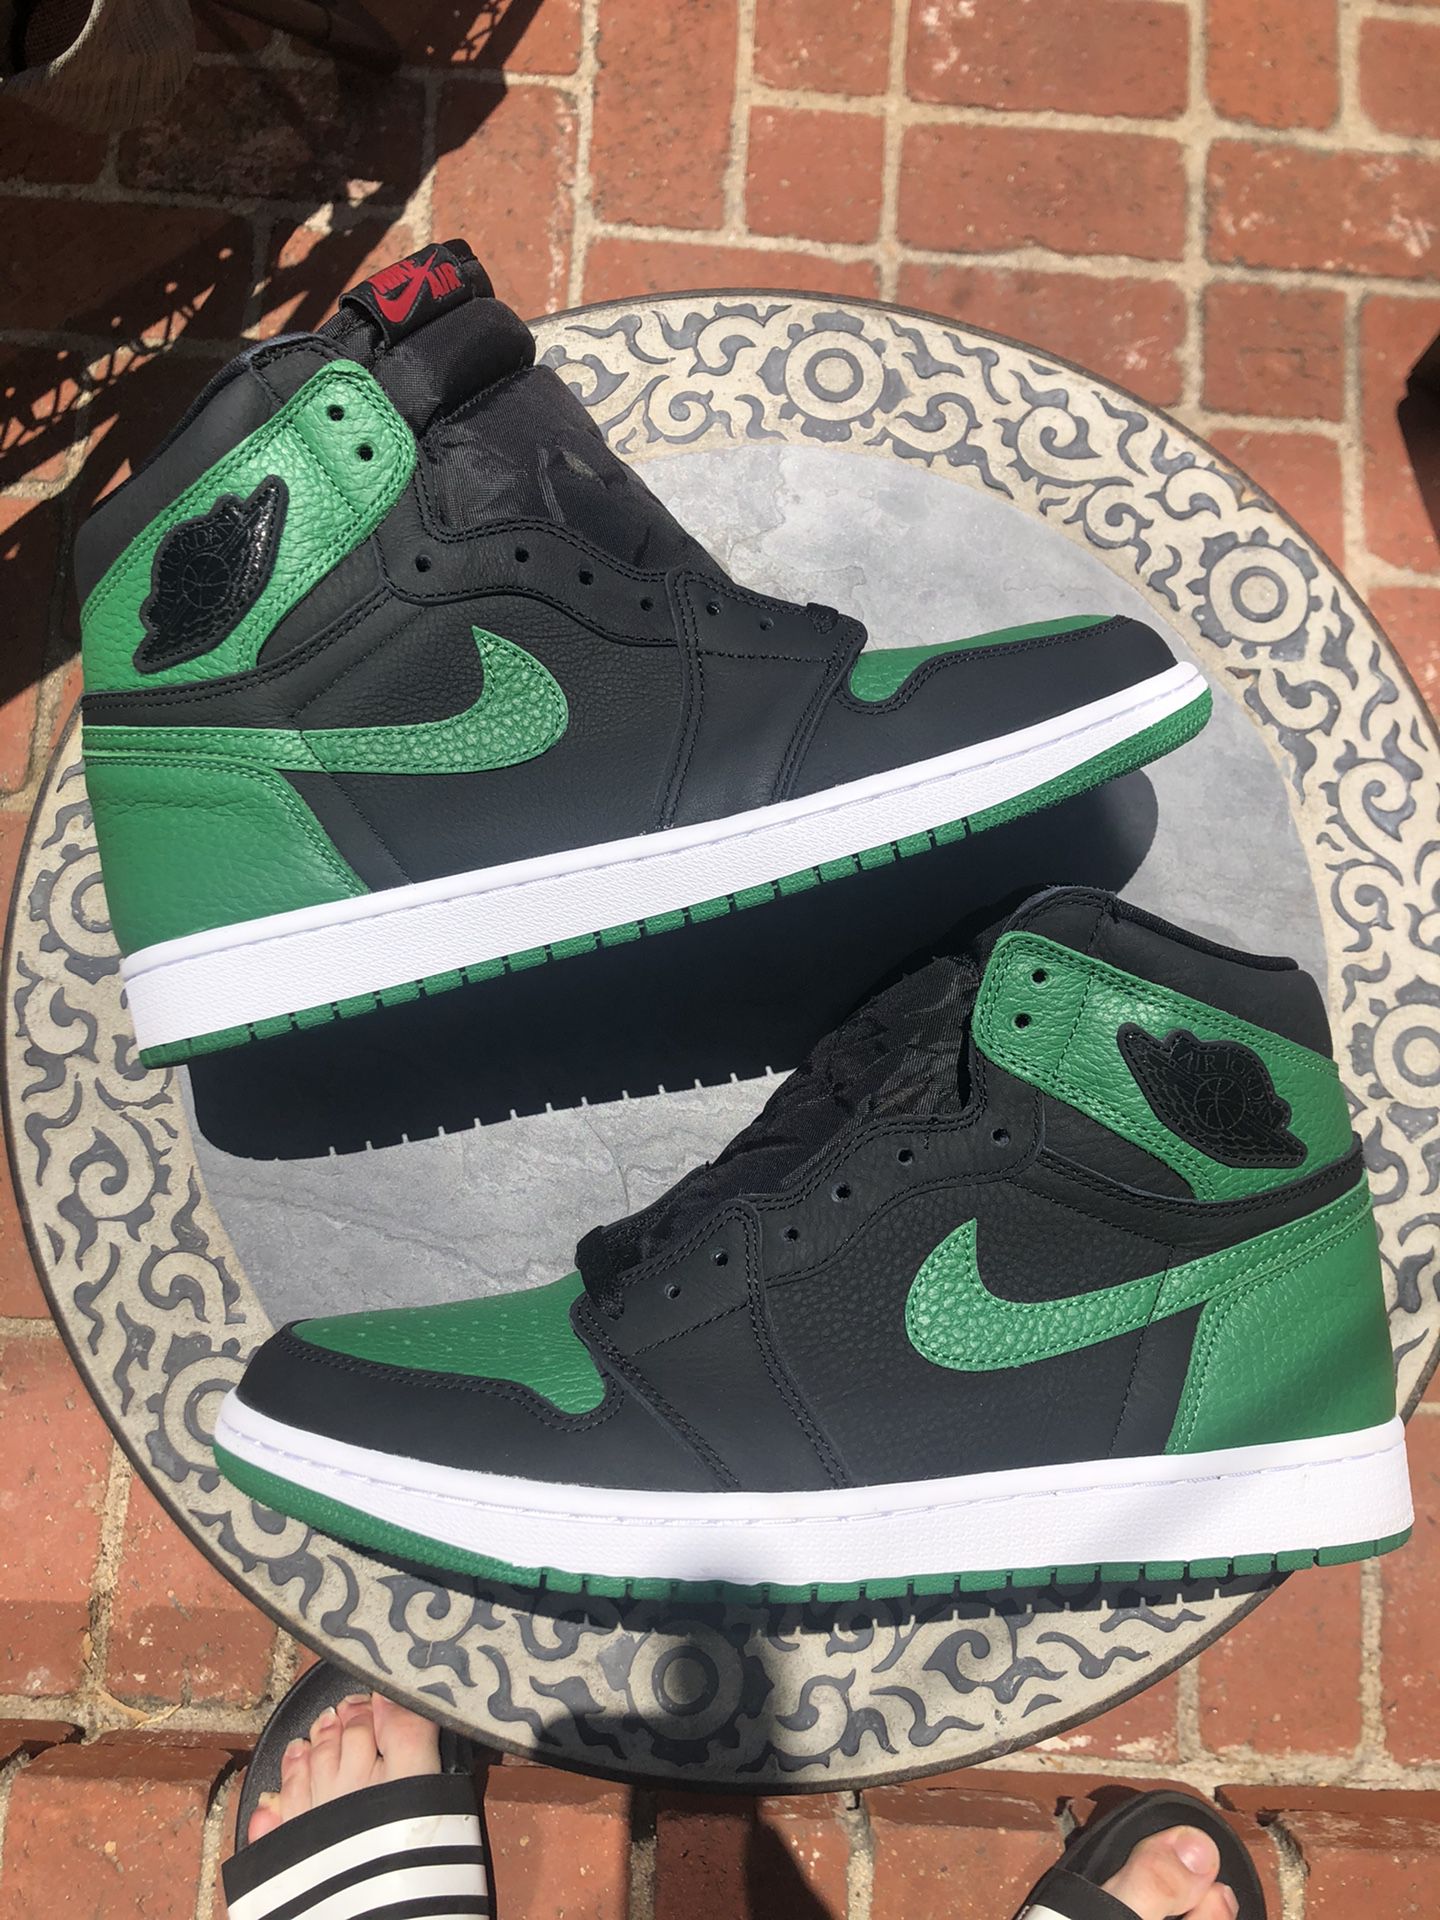 DS Jordan 1 ‘Pine Green 2.0’ LOOKING TO TRADE FOR A SIZE 10